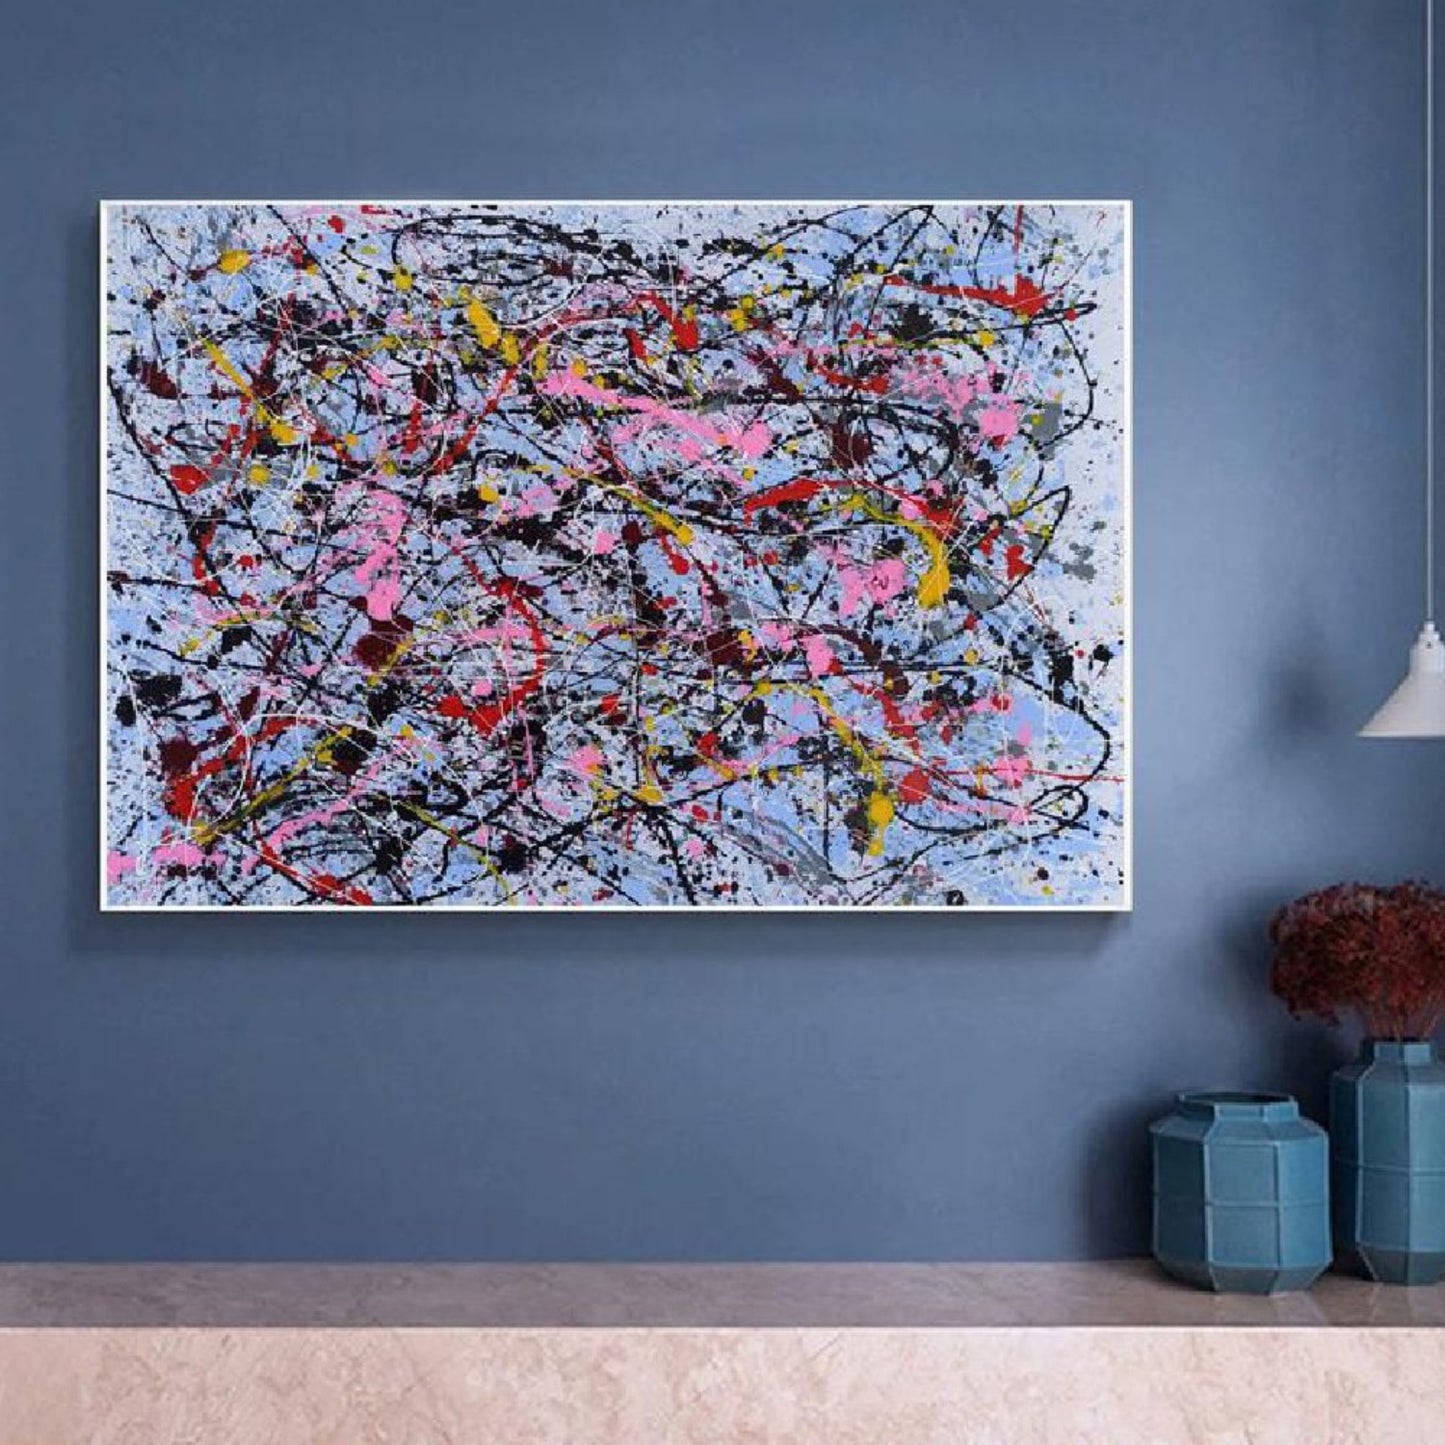 Jackson Pollock Style Unique Abstract Oil Painting